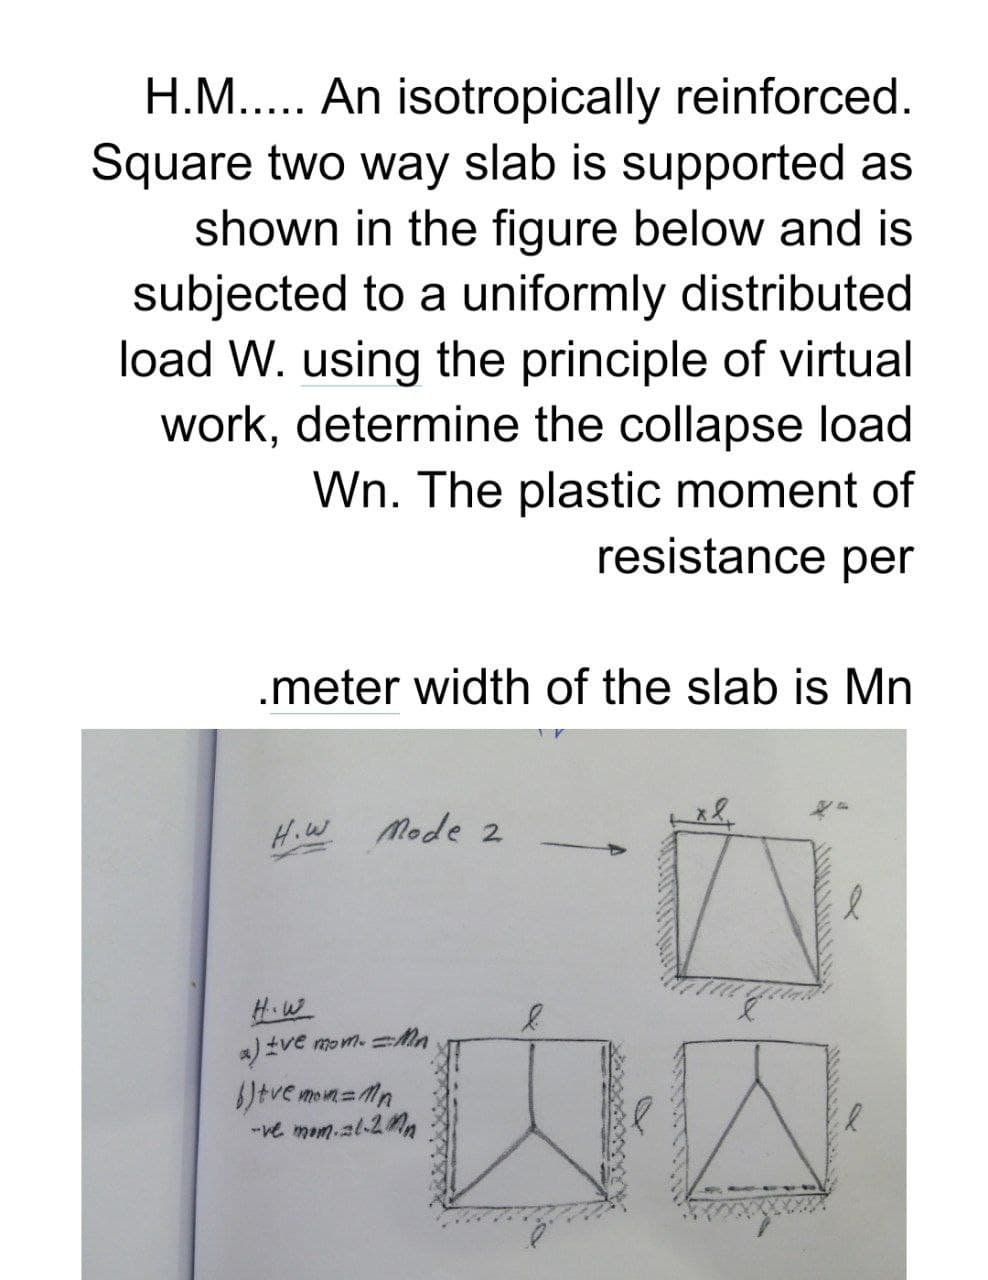 H.M..... An isotropically reinforced.
Square two way slab is supported as
shown in the figure below and is
subjected to a uniformly distributed
load W. using the principle of virtual
work, determine the collapse load
Wn. The plastic moment of
resistance per
.meter width of the slab is Mn
H.W Mode 2
H.W
a) ±ve mom. Mn
tve mom=Mn
-ve mom.al-2nn
内容